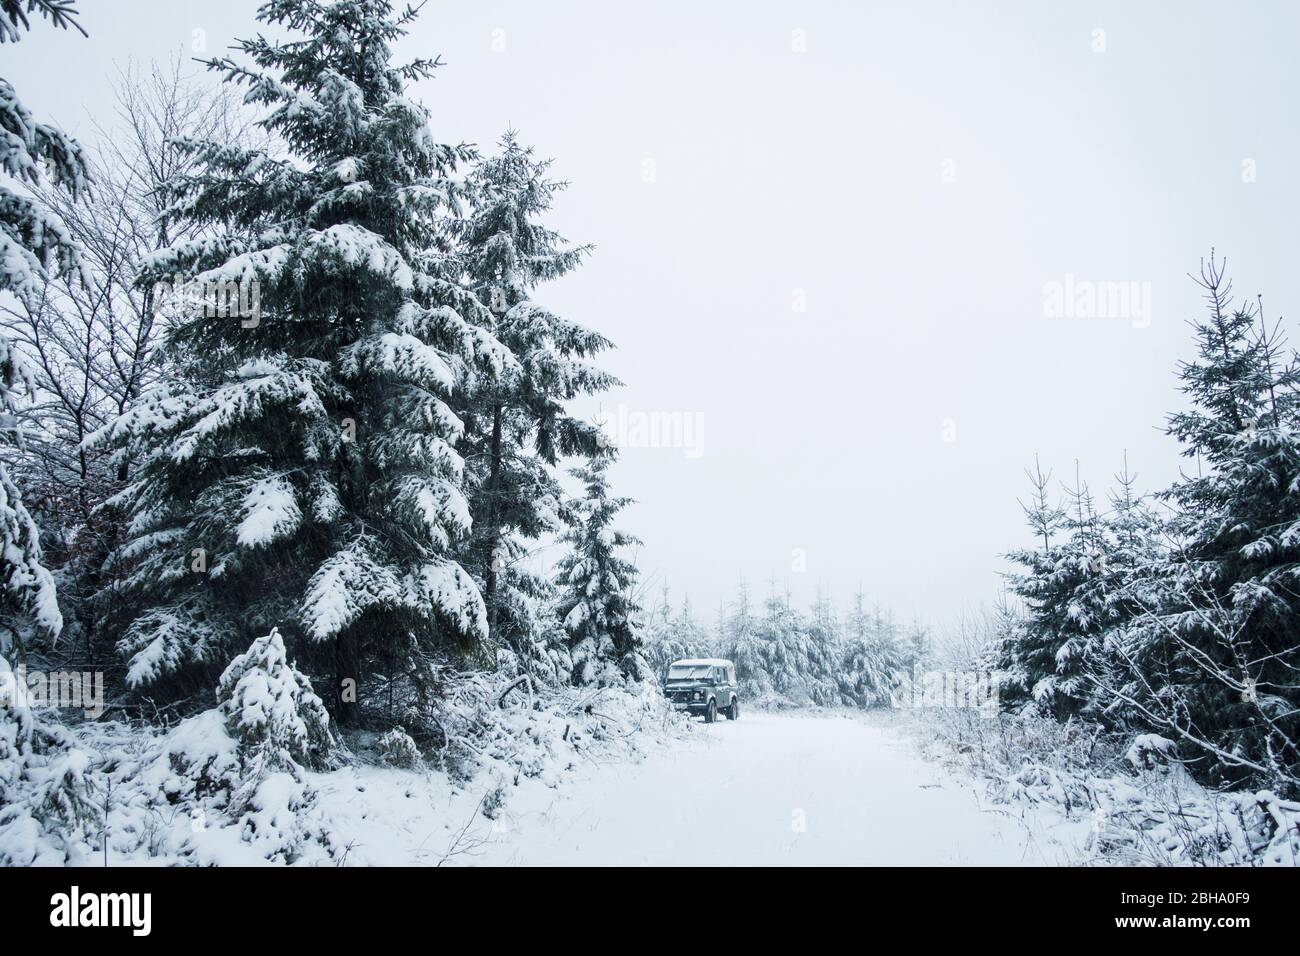 Spruce forest in the snow, Arnsberger Wald Nature Park, Sauerland, Germany Stock Photo